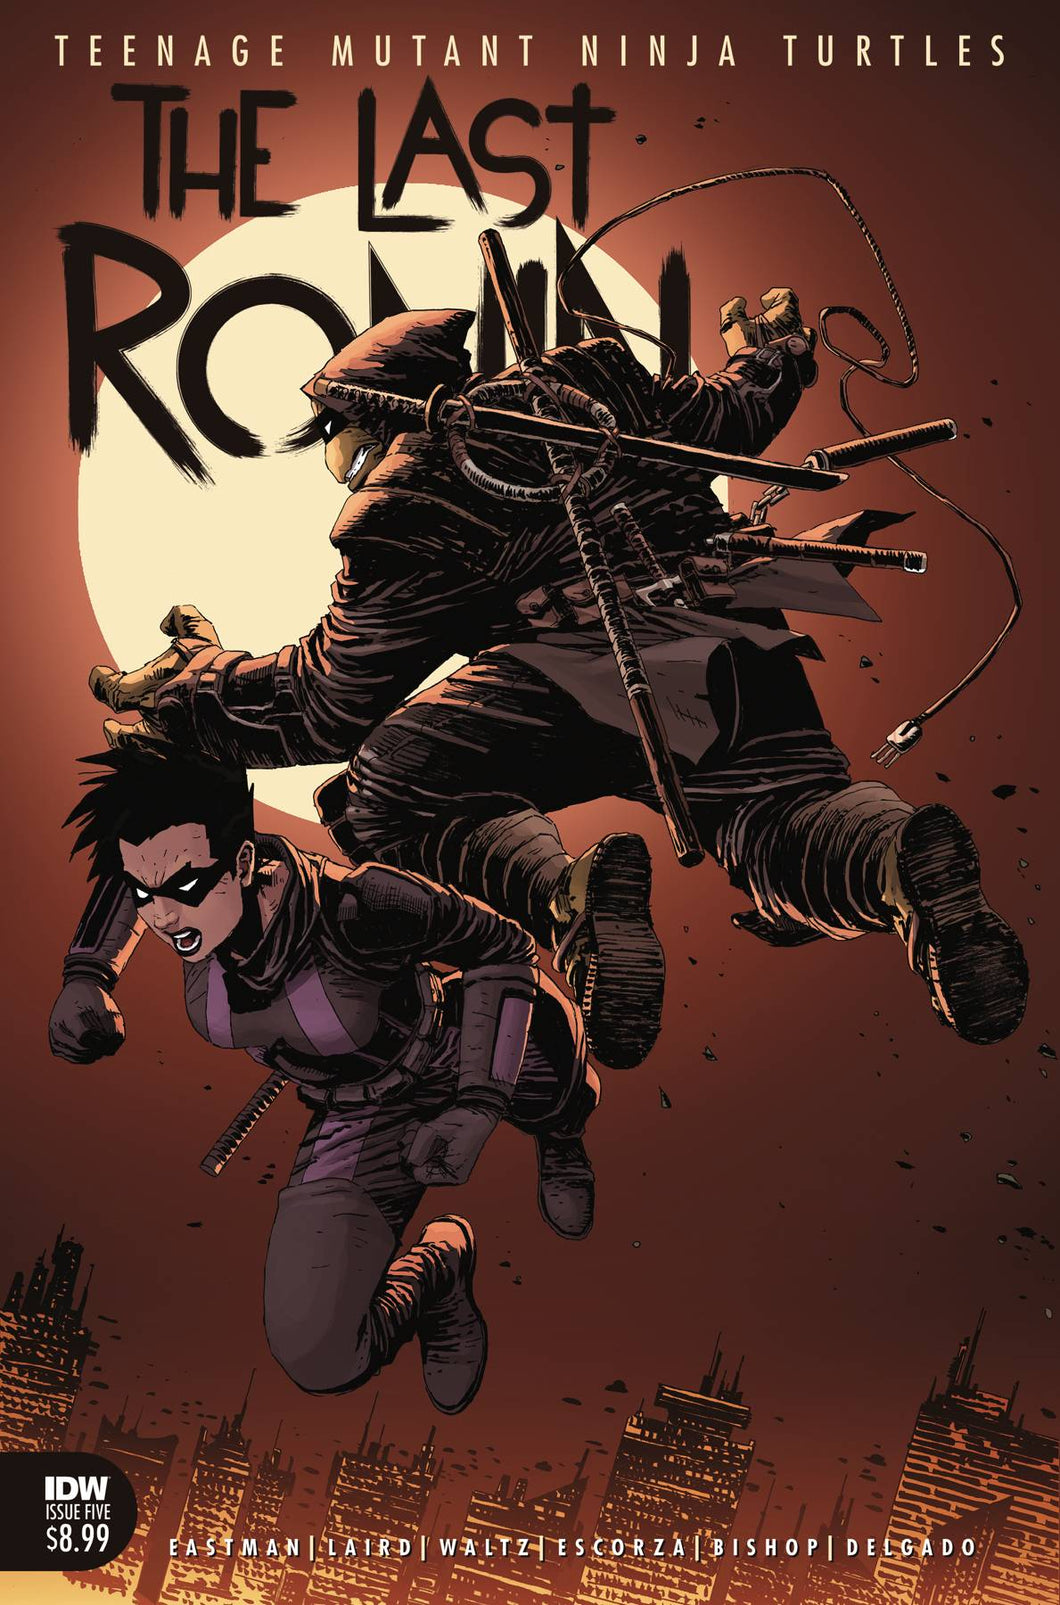 TMNT: The Last Ronin #5 (Cover A - Eastman)